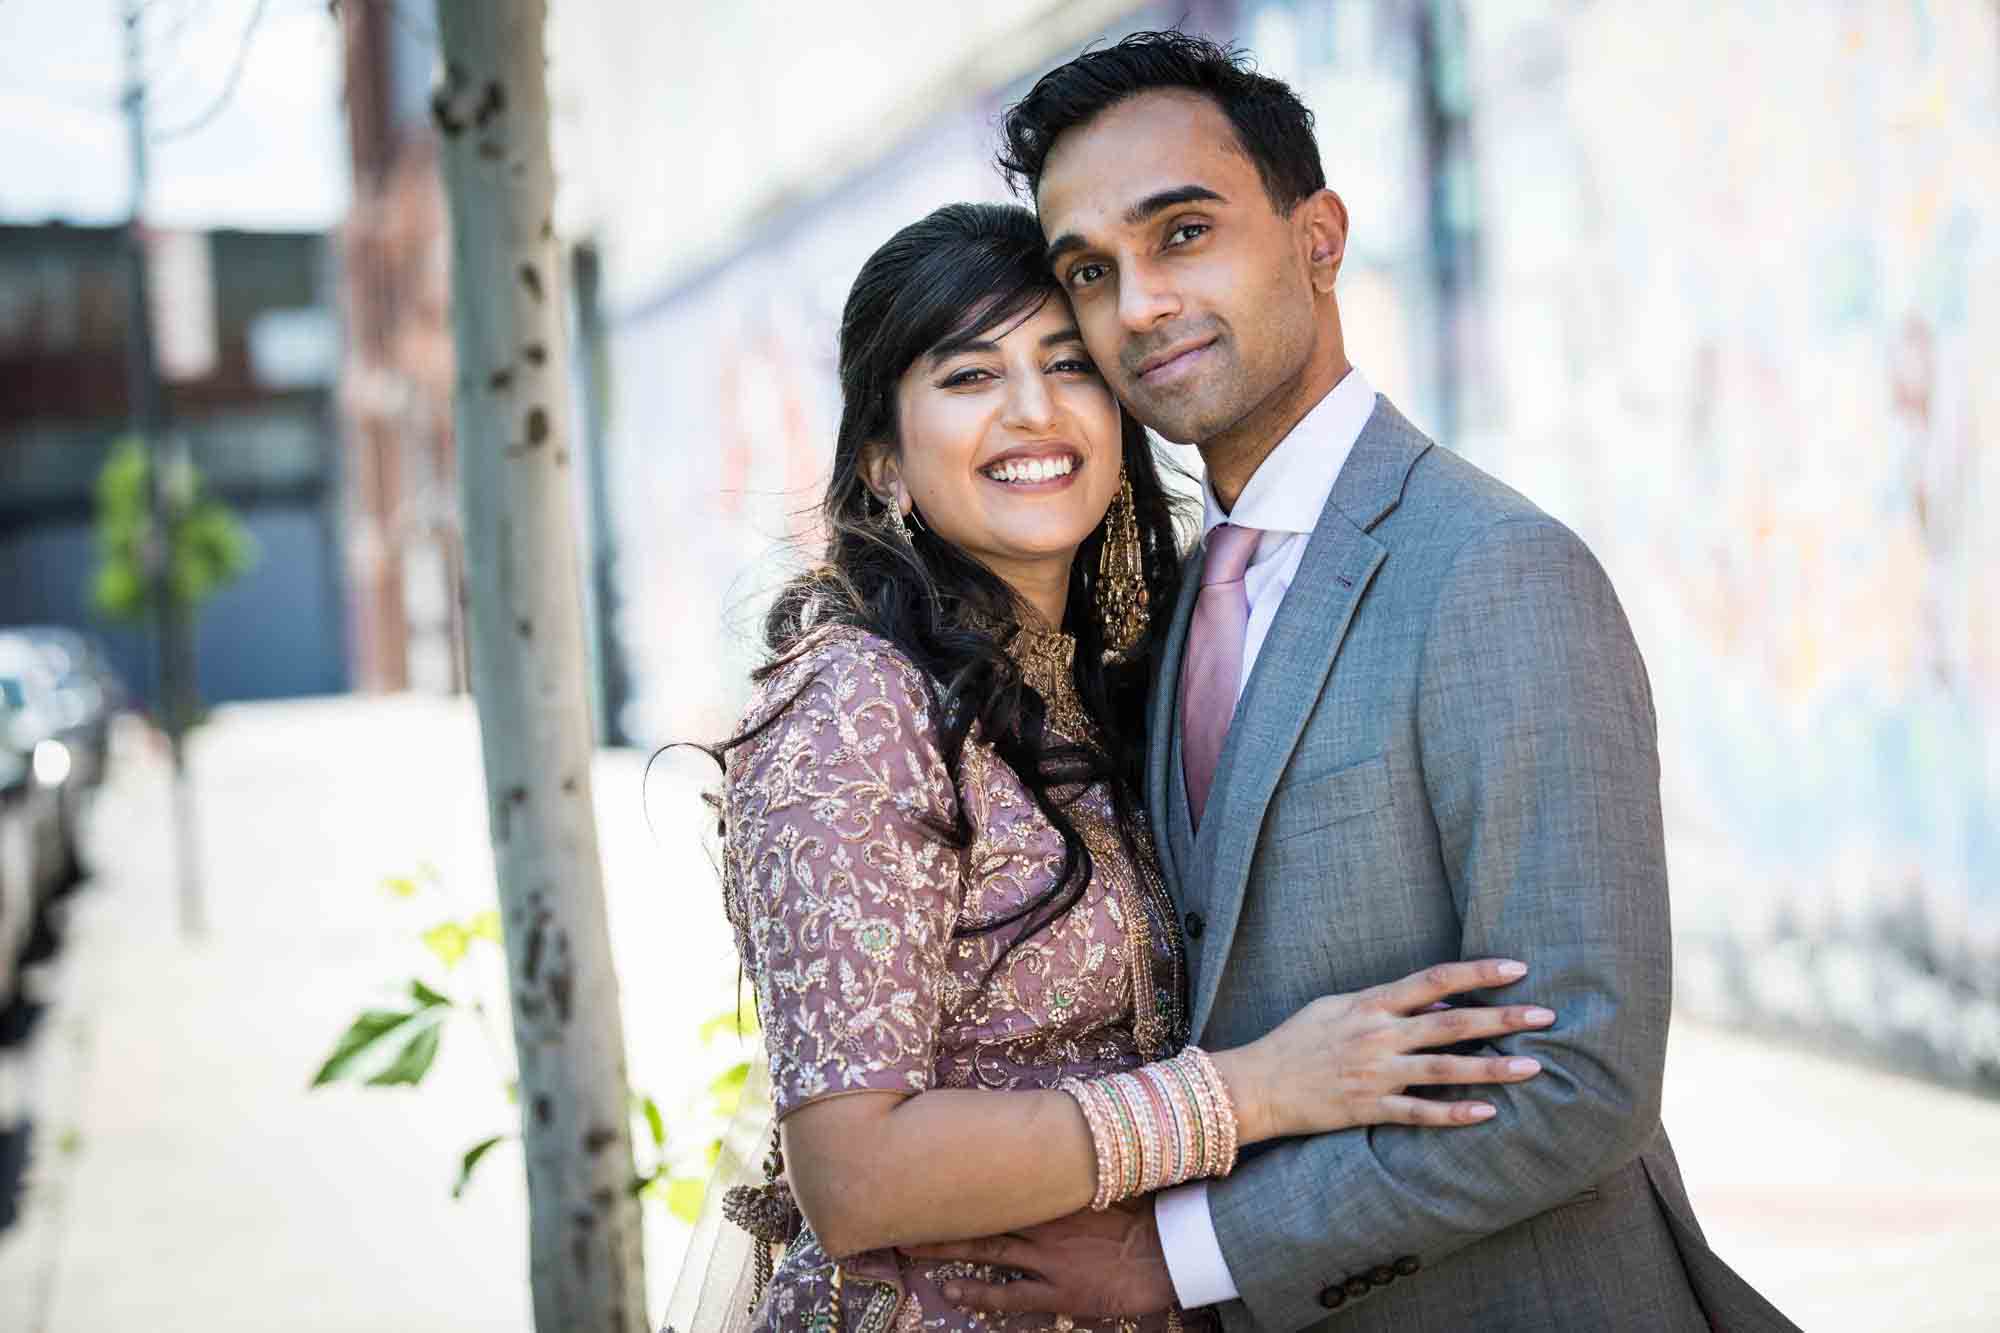 Bride wearing pink Indian wedding dress and groom in grey suit hugging for article on wedding reception game ideas